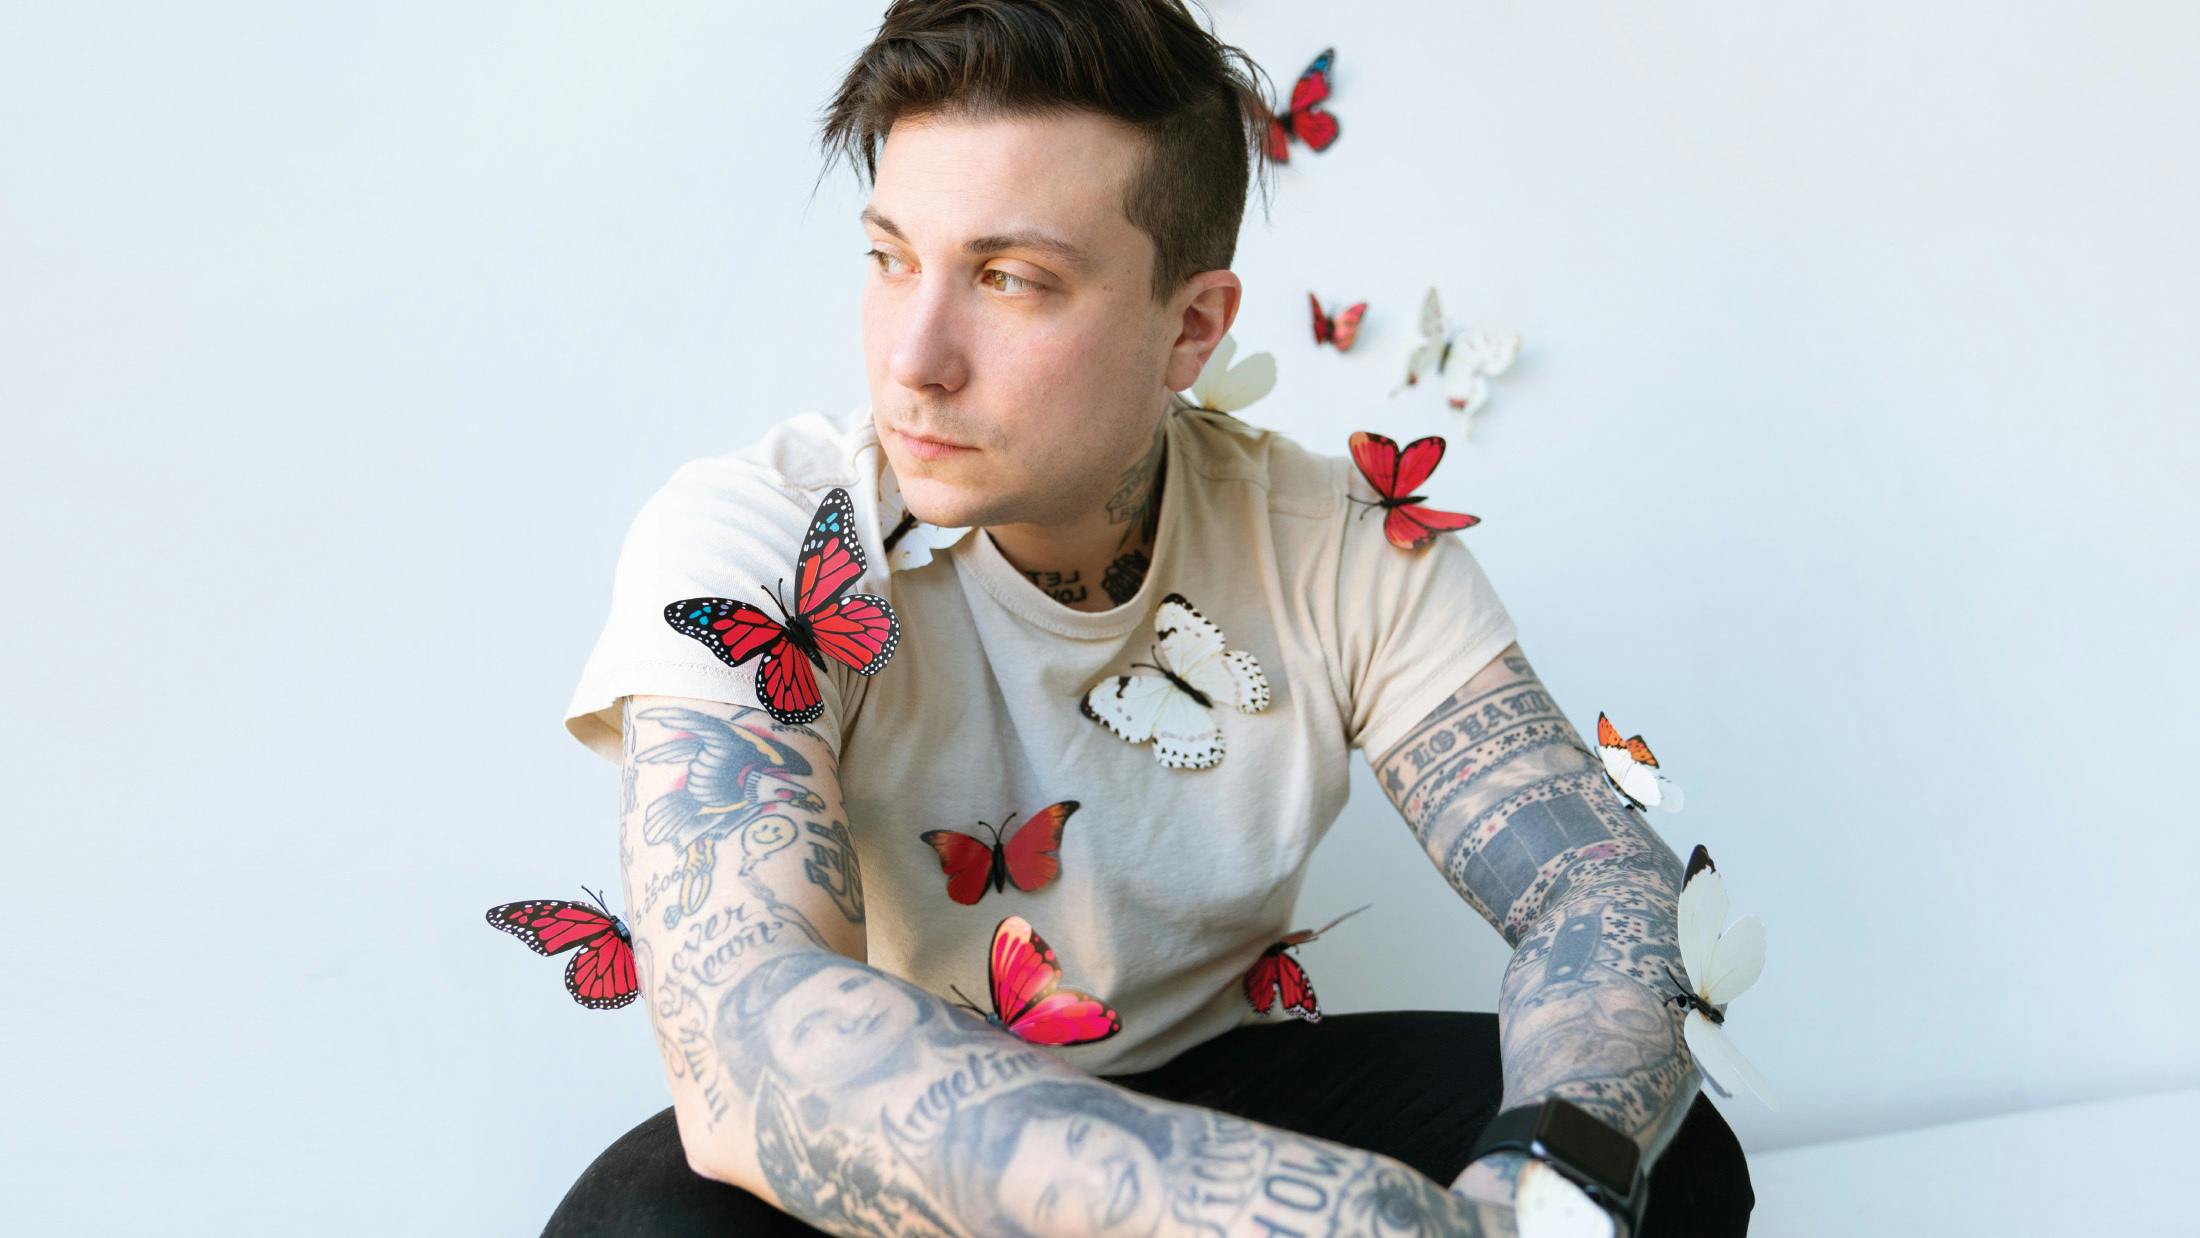 "I Still Have Nightmares… But Quitting Is Not An Option": The Rebirth Of Frank Iero